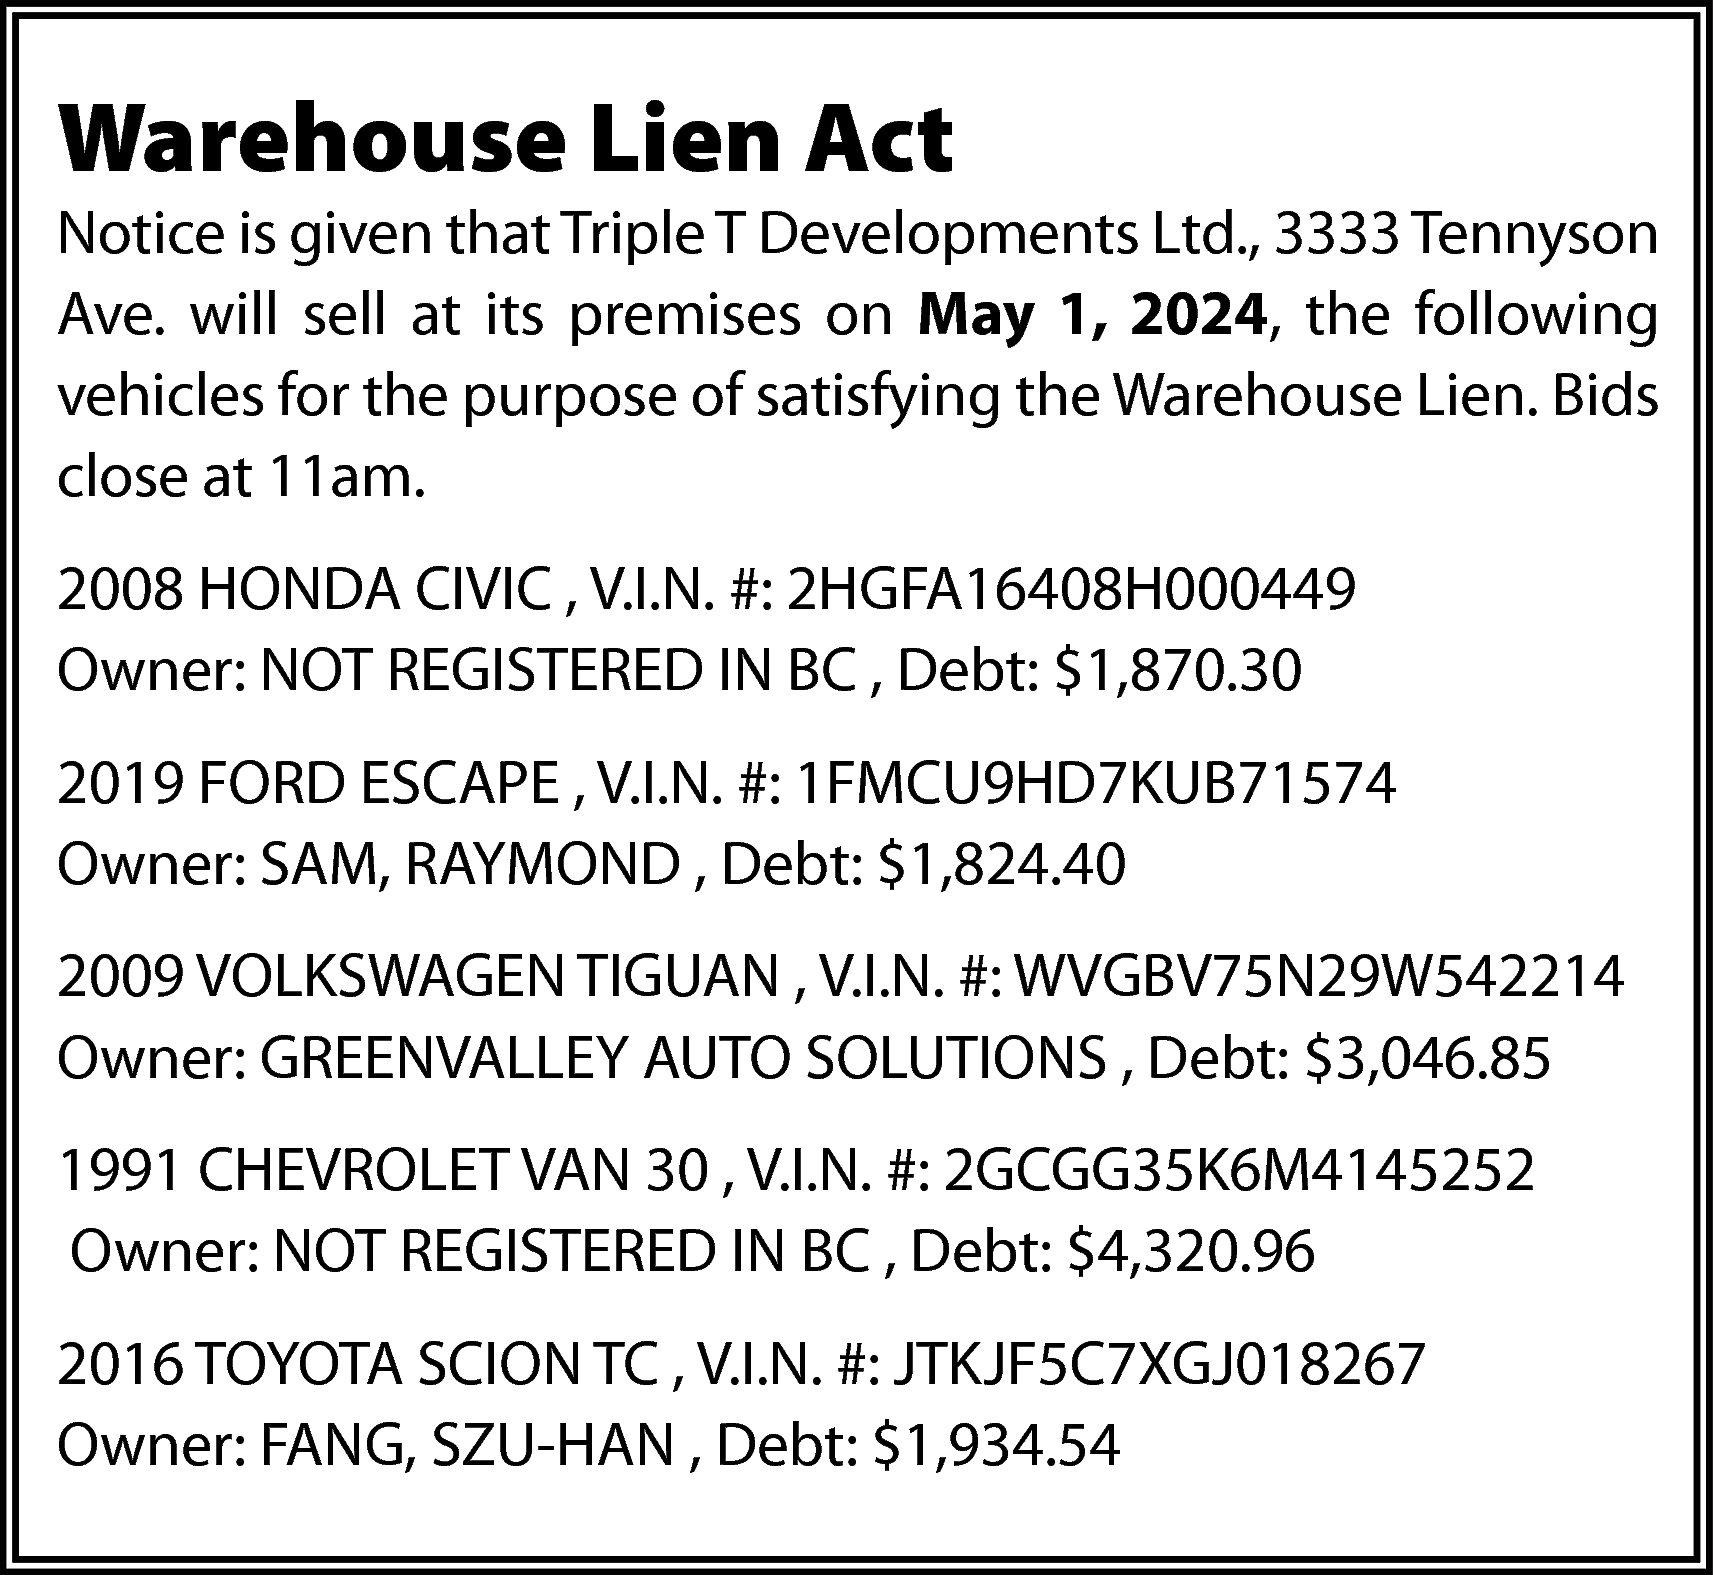 Warehouse Lien Act <br> <br>Notice  Warehouse Lien Act    Notice is given that Triple T Developments Ltd., 3333 Tennyson  Ave. will sell at its premises on May 1, 2024, the following  vehicles for the purpose of satisfying the Warehouse Lien. Bids  close at 11am.  2008 HONDA CIVIC , V.I.N. #: 2HGFA16408H000449  Owner: NOT REGISTERED IN BC , Debt: $1,870.30  2019 FORD ESCAPE , V.I.N. #: 1FMCU9HD7KUB71574  Owner: SAM, RAYMOND , Debt: $1,824.40  2009 VOLKSWAGEN TIGUAN , V.I.N. #: WVGBV75N29W542214  Owner: GREENVALLEY AUTO SOLUTIONS , Debt: $3,046.85  1991 CHEVROLET VAN 30 , V.I.N. #: 2GCGG35K6M4145252  Owner: NOT REGISTERED IN BC , Debt: $4,320.96  2016 TOYOTA SCION TC , V.I.N. #: JTKJF5C7XGJ018267  Owner: FANG, SZU-HAN , Debt: $1,934.54    